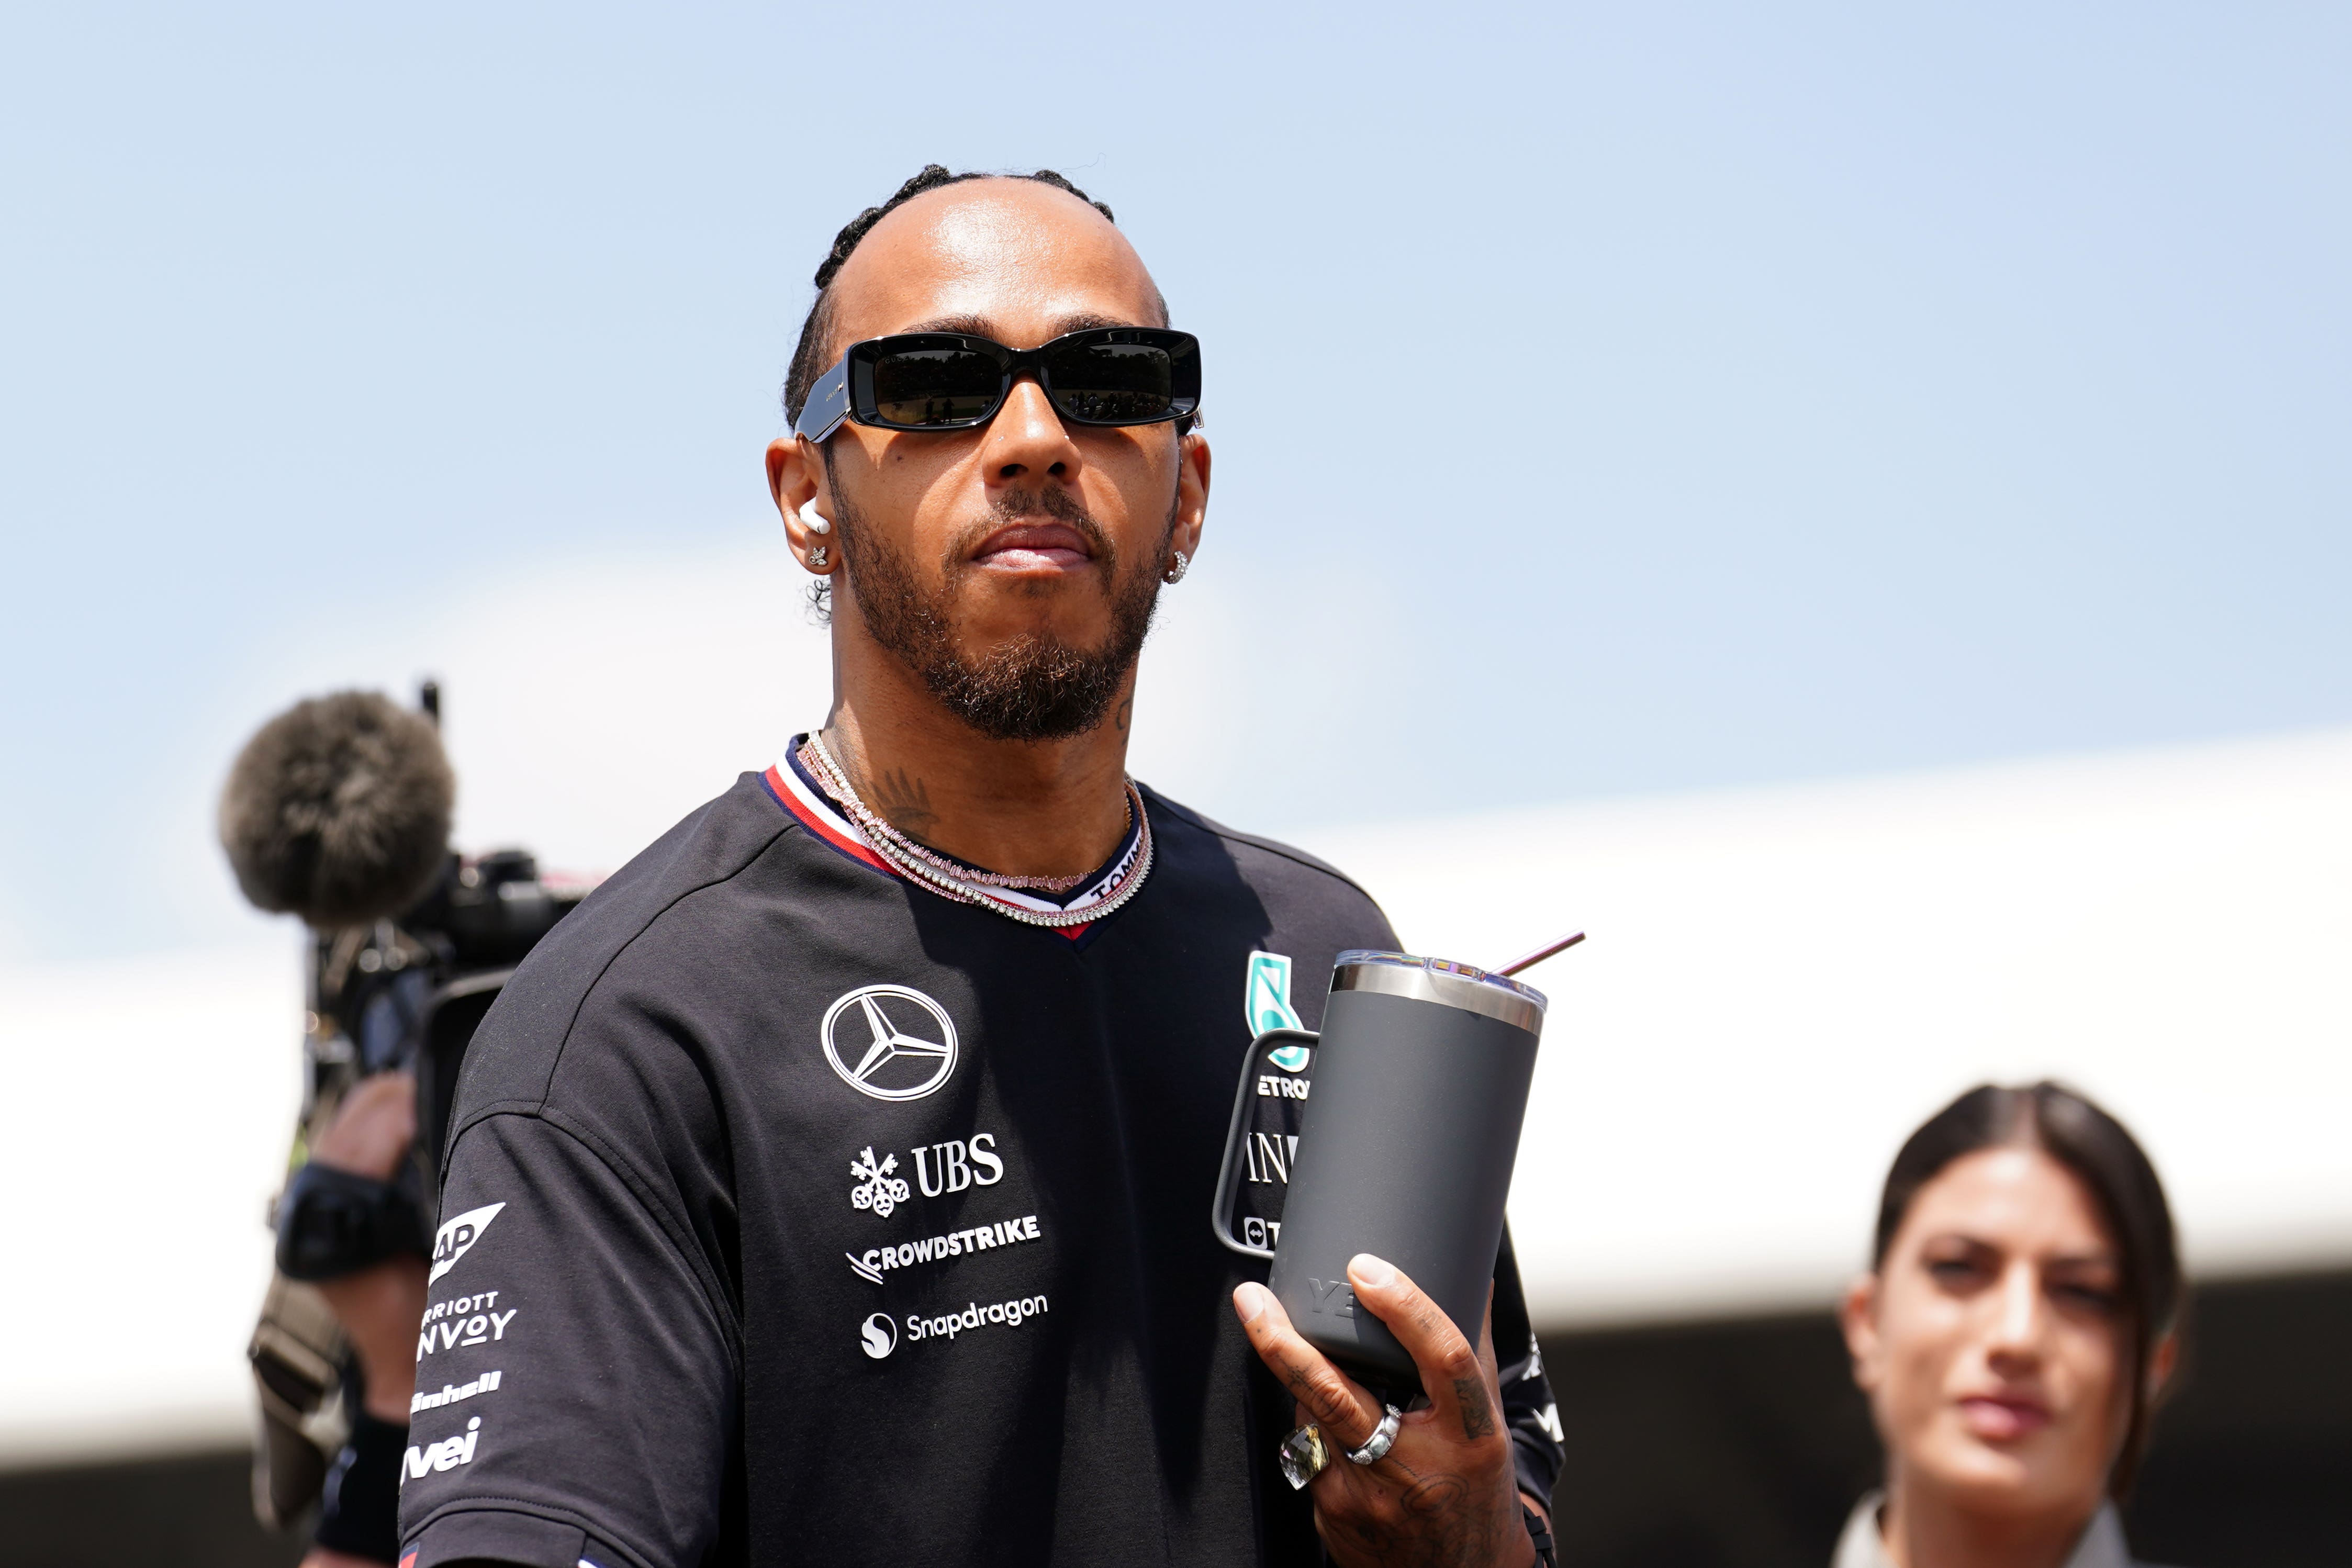 An email has claimed Lewis Hamilton’s car has been sabotaged by Mercedes (David Davies/PA)